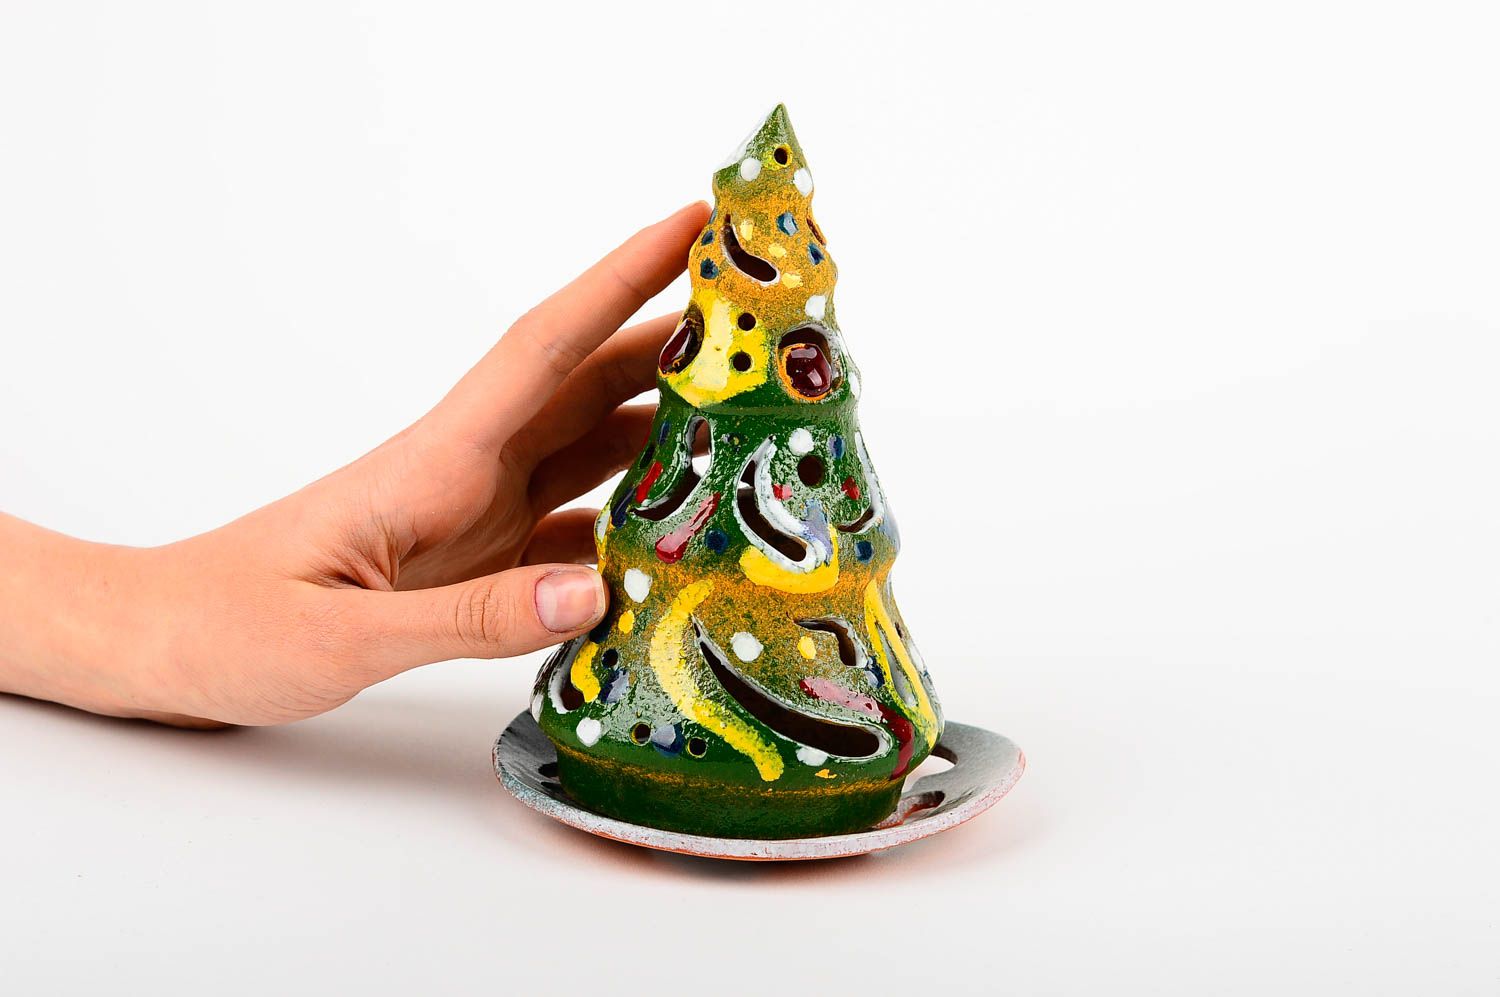 Tealight ceramic light-glow Christmas tree candle holder 5,9 inches, 0,43 lb photo 2